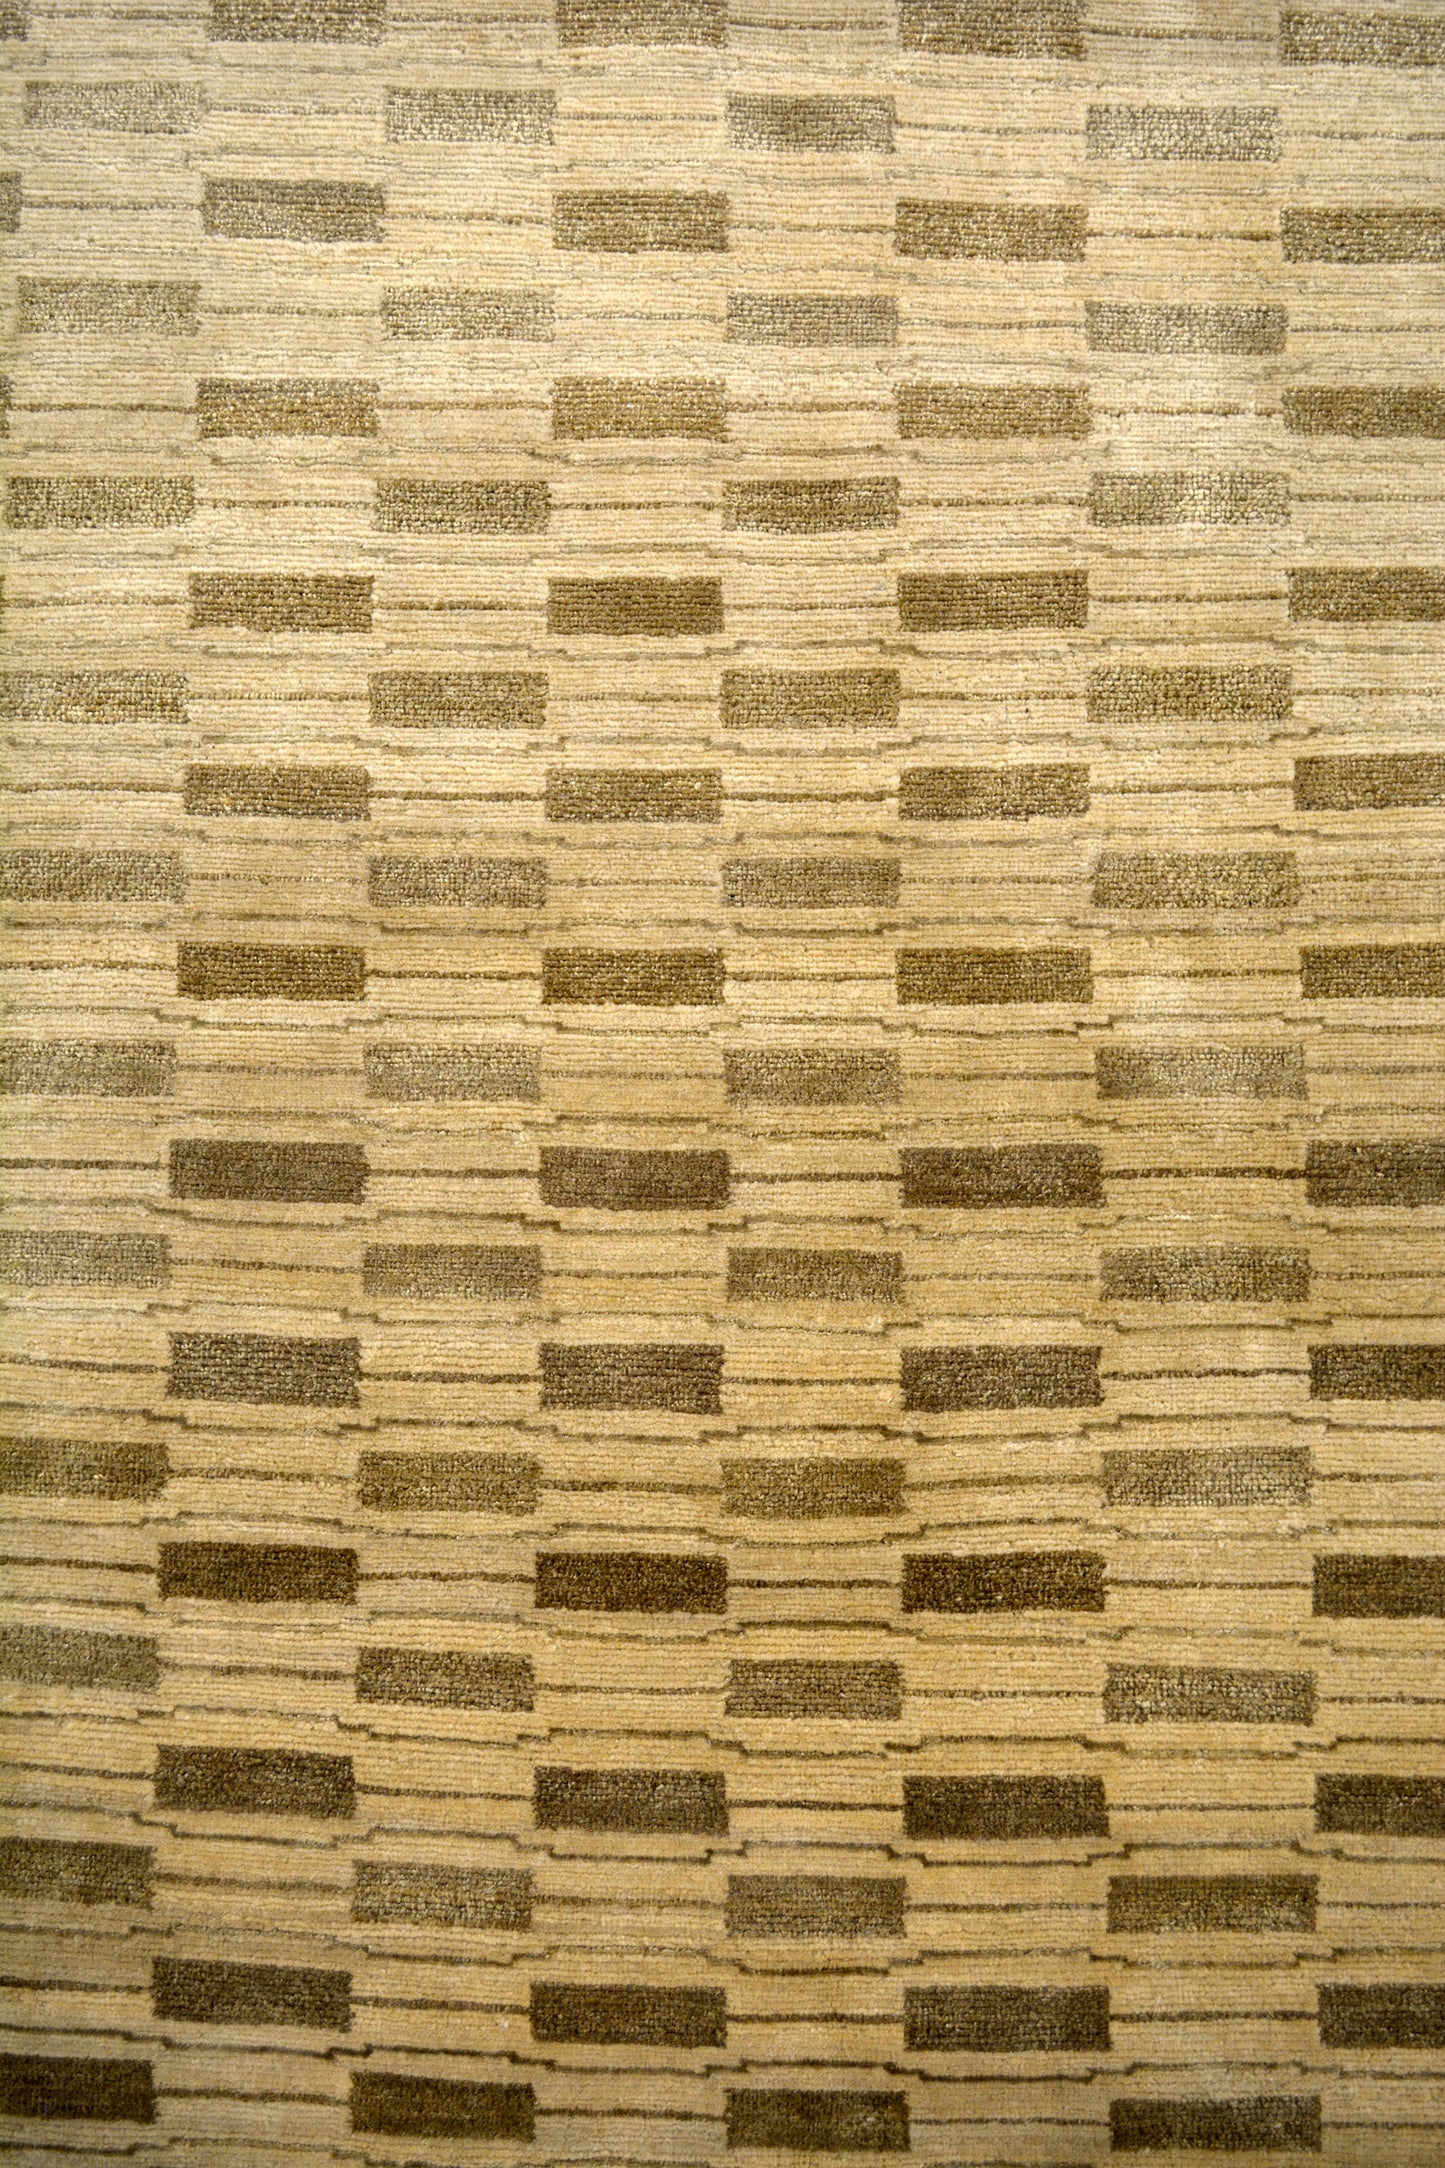 The pattern displays over the whole rug evenly. 